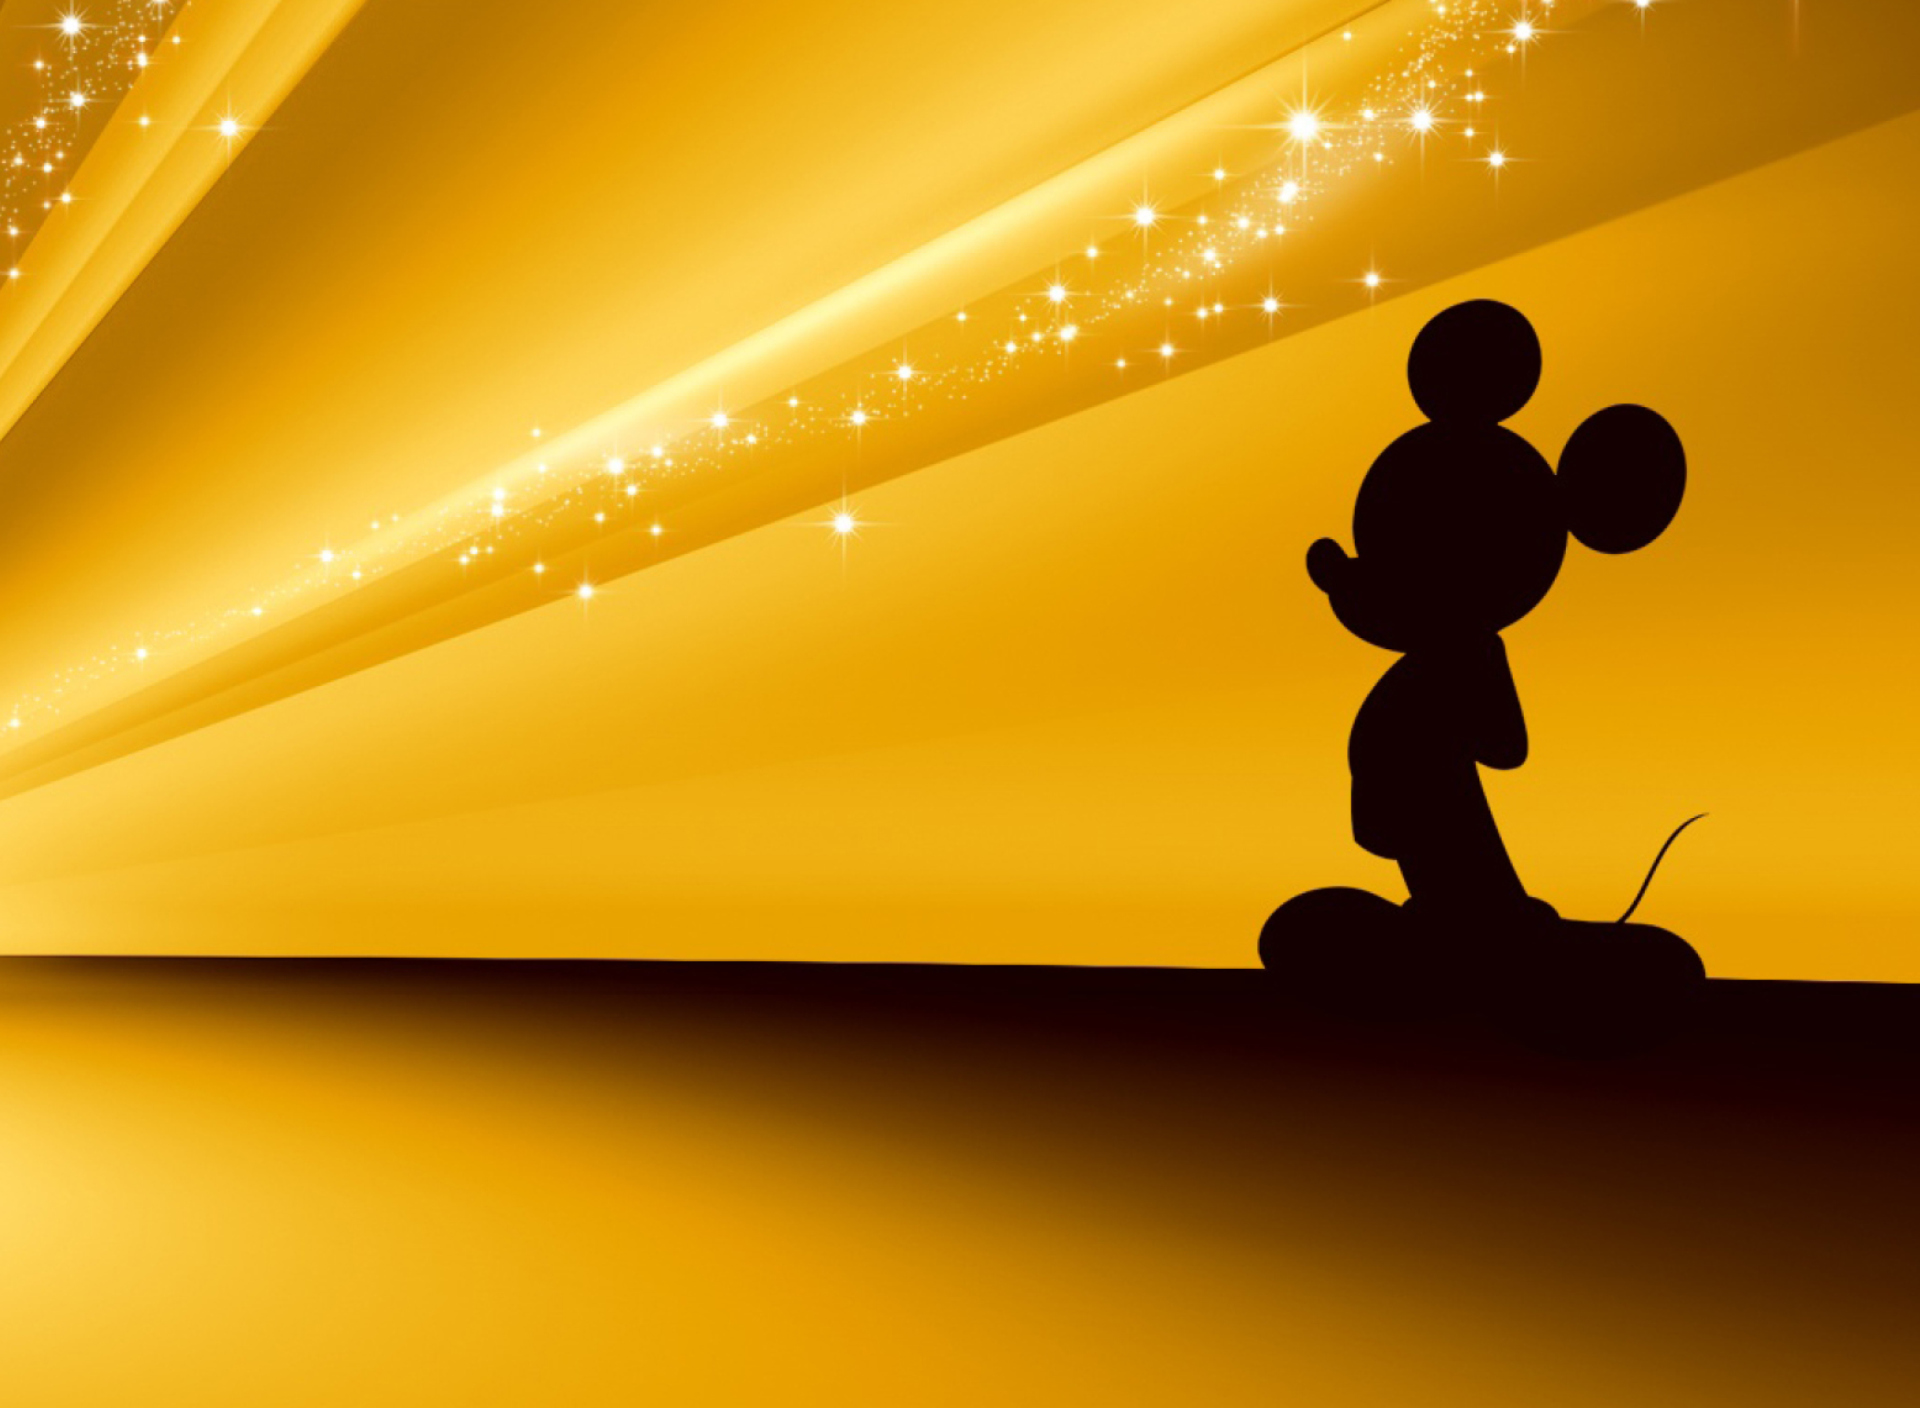 Mouse Disney Gold Wallpaper For Samsung Galaxy Tab